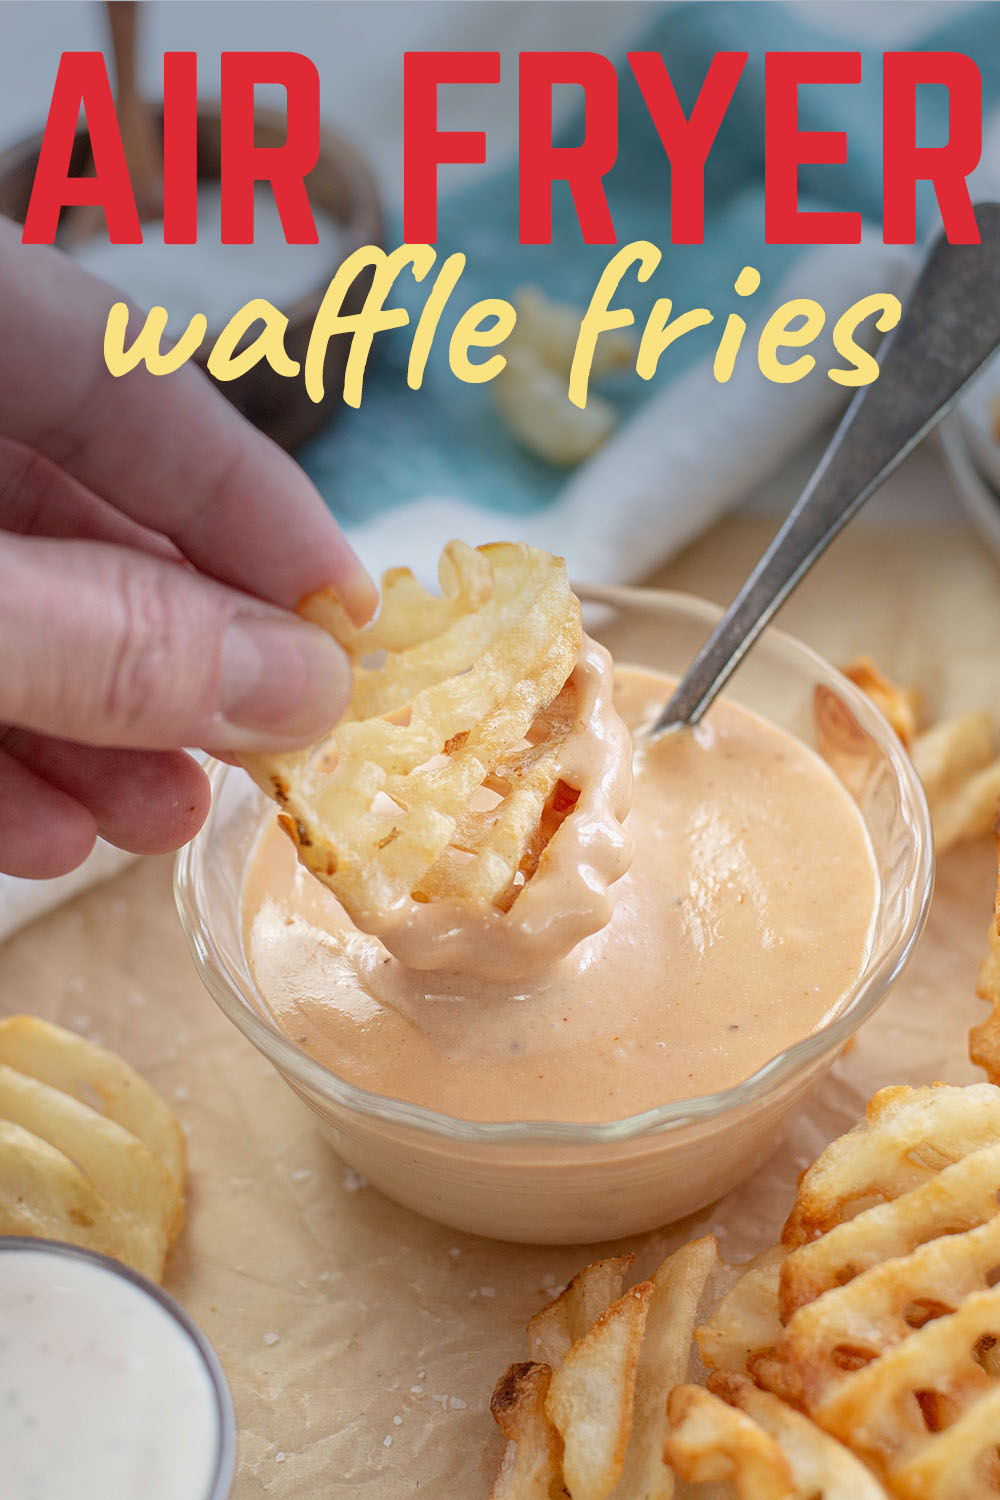 Person dipping a waffle fry in fry sauce.